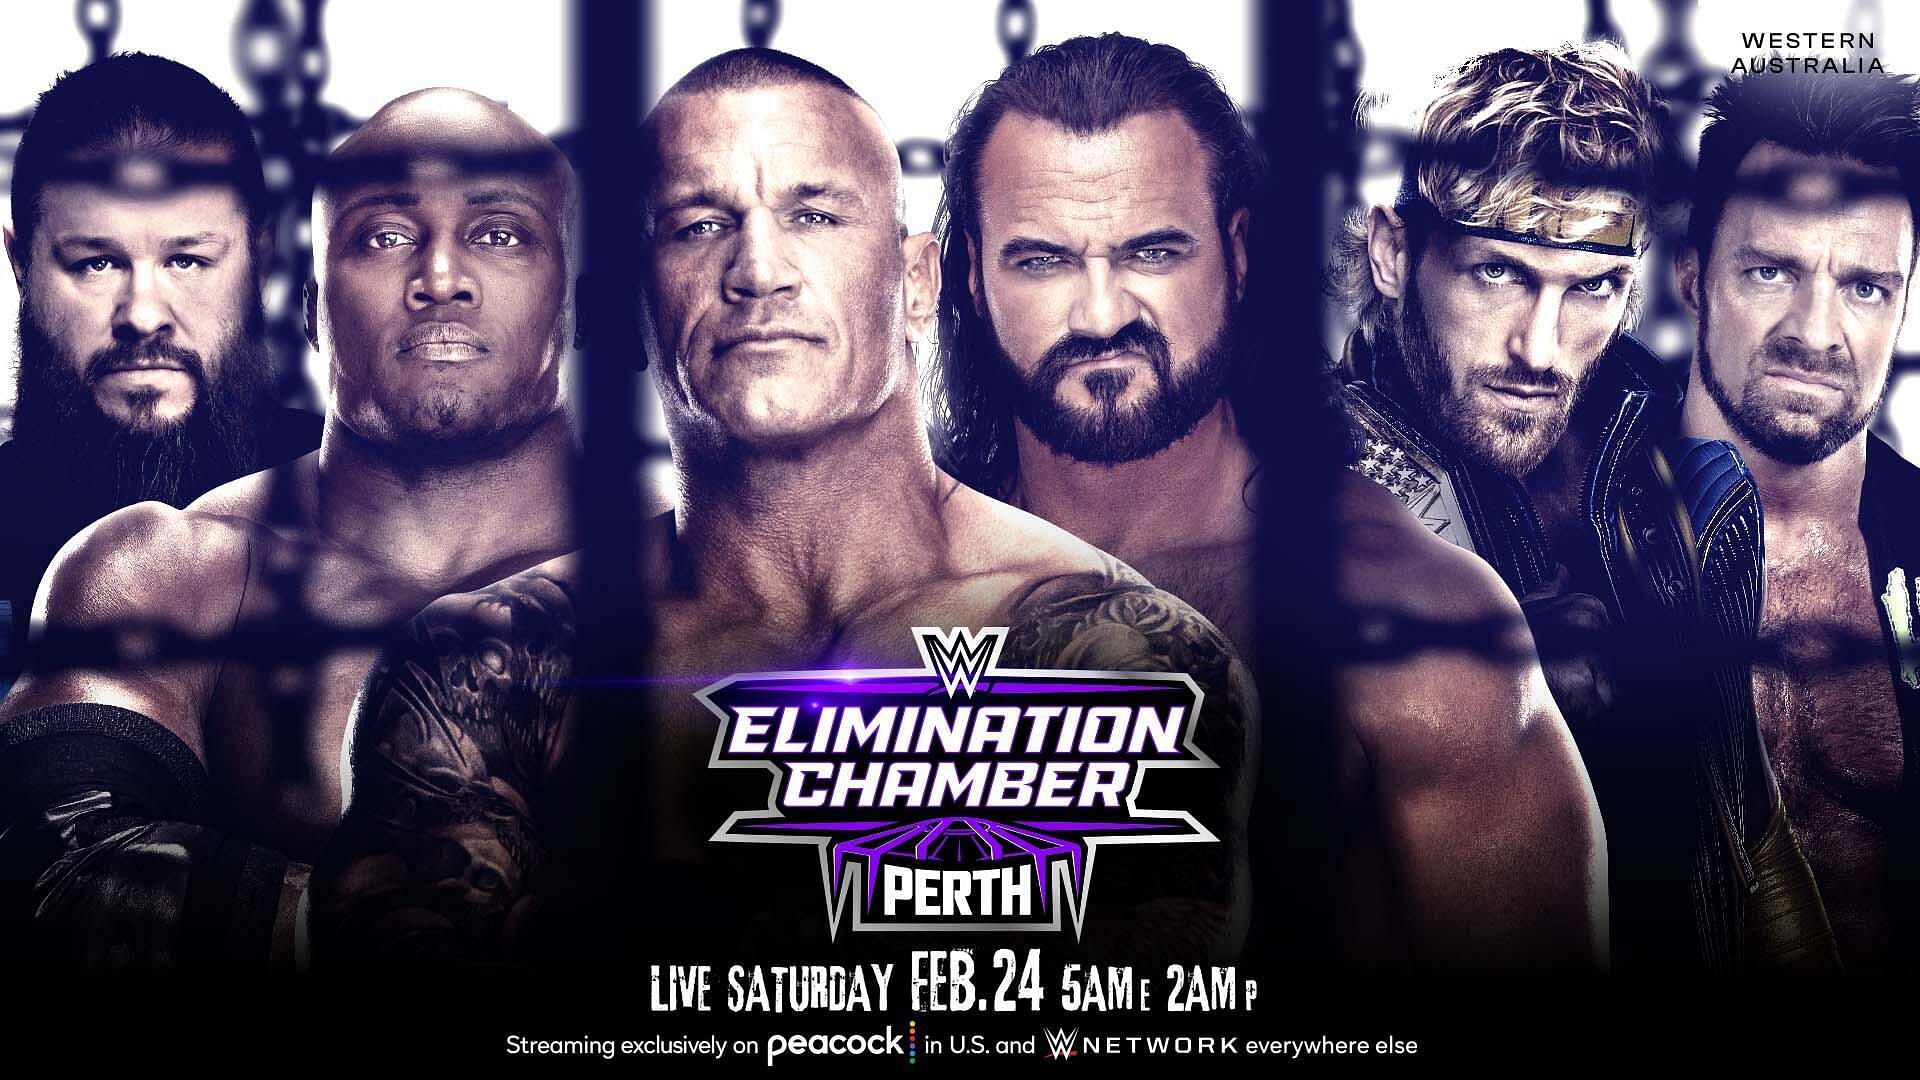 Elimination Chamber this year will be live from Perth, Australia